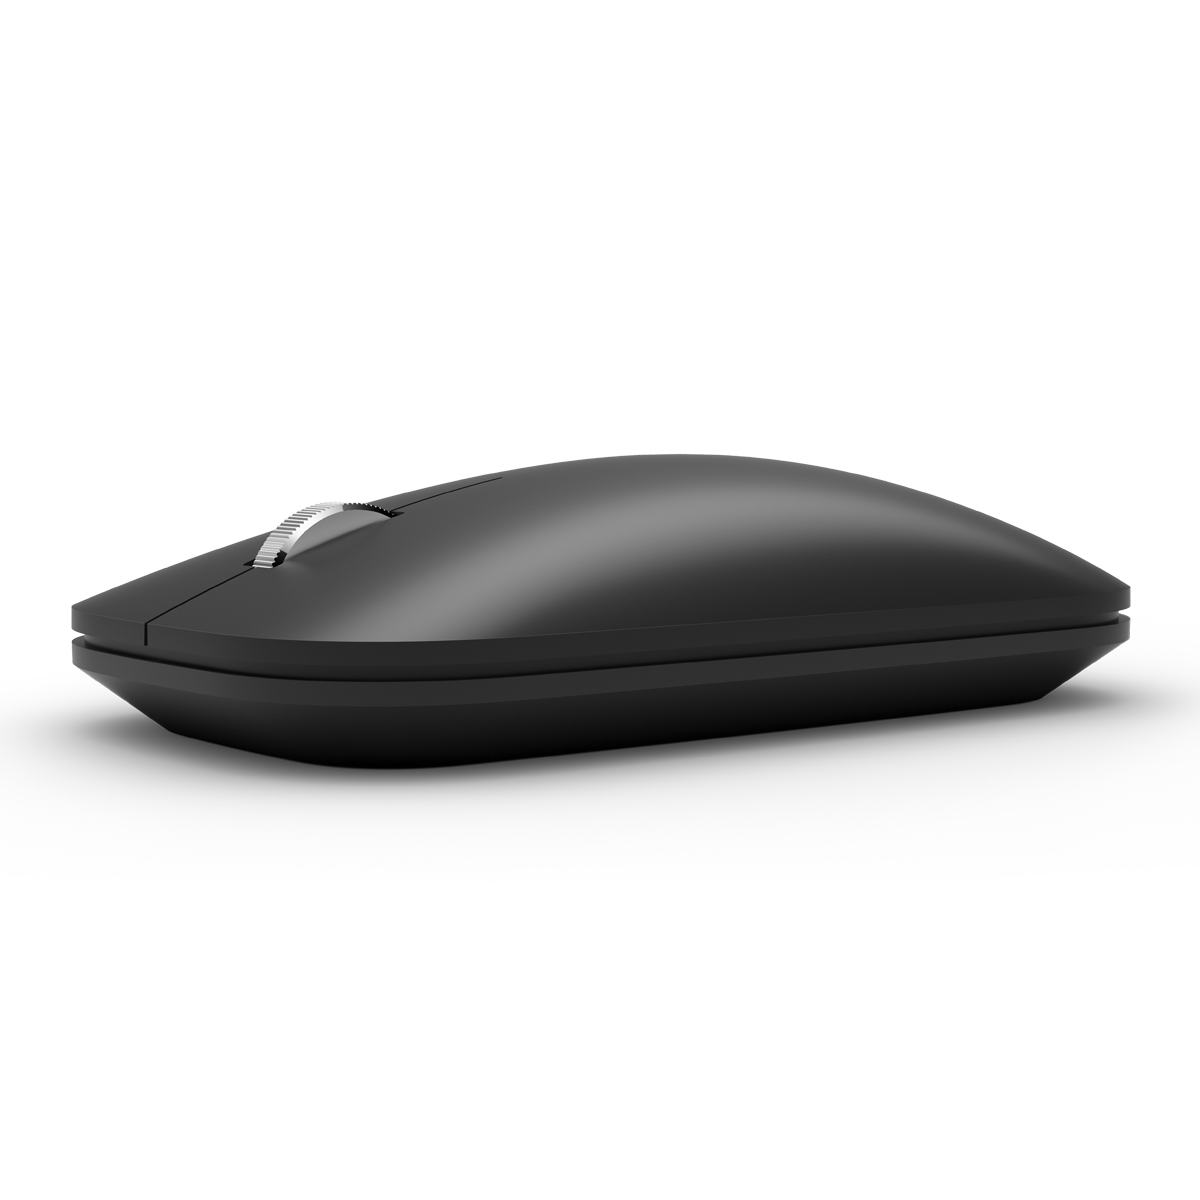 Microsoft Modern Mobile Mouse, , large image number 1